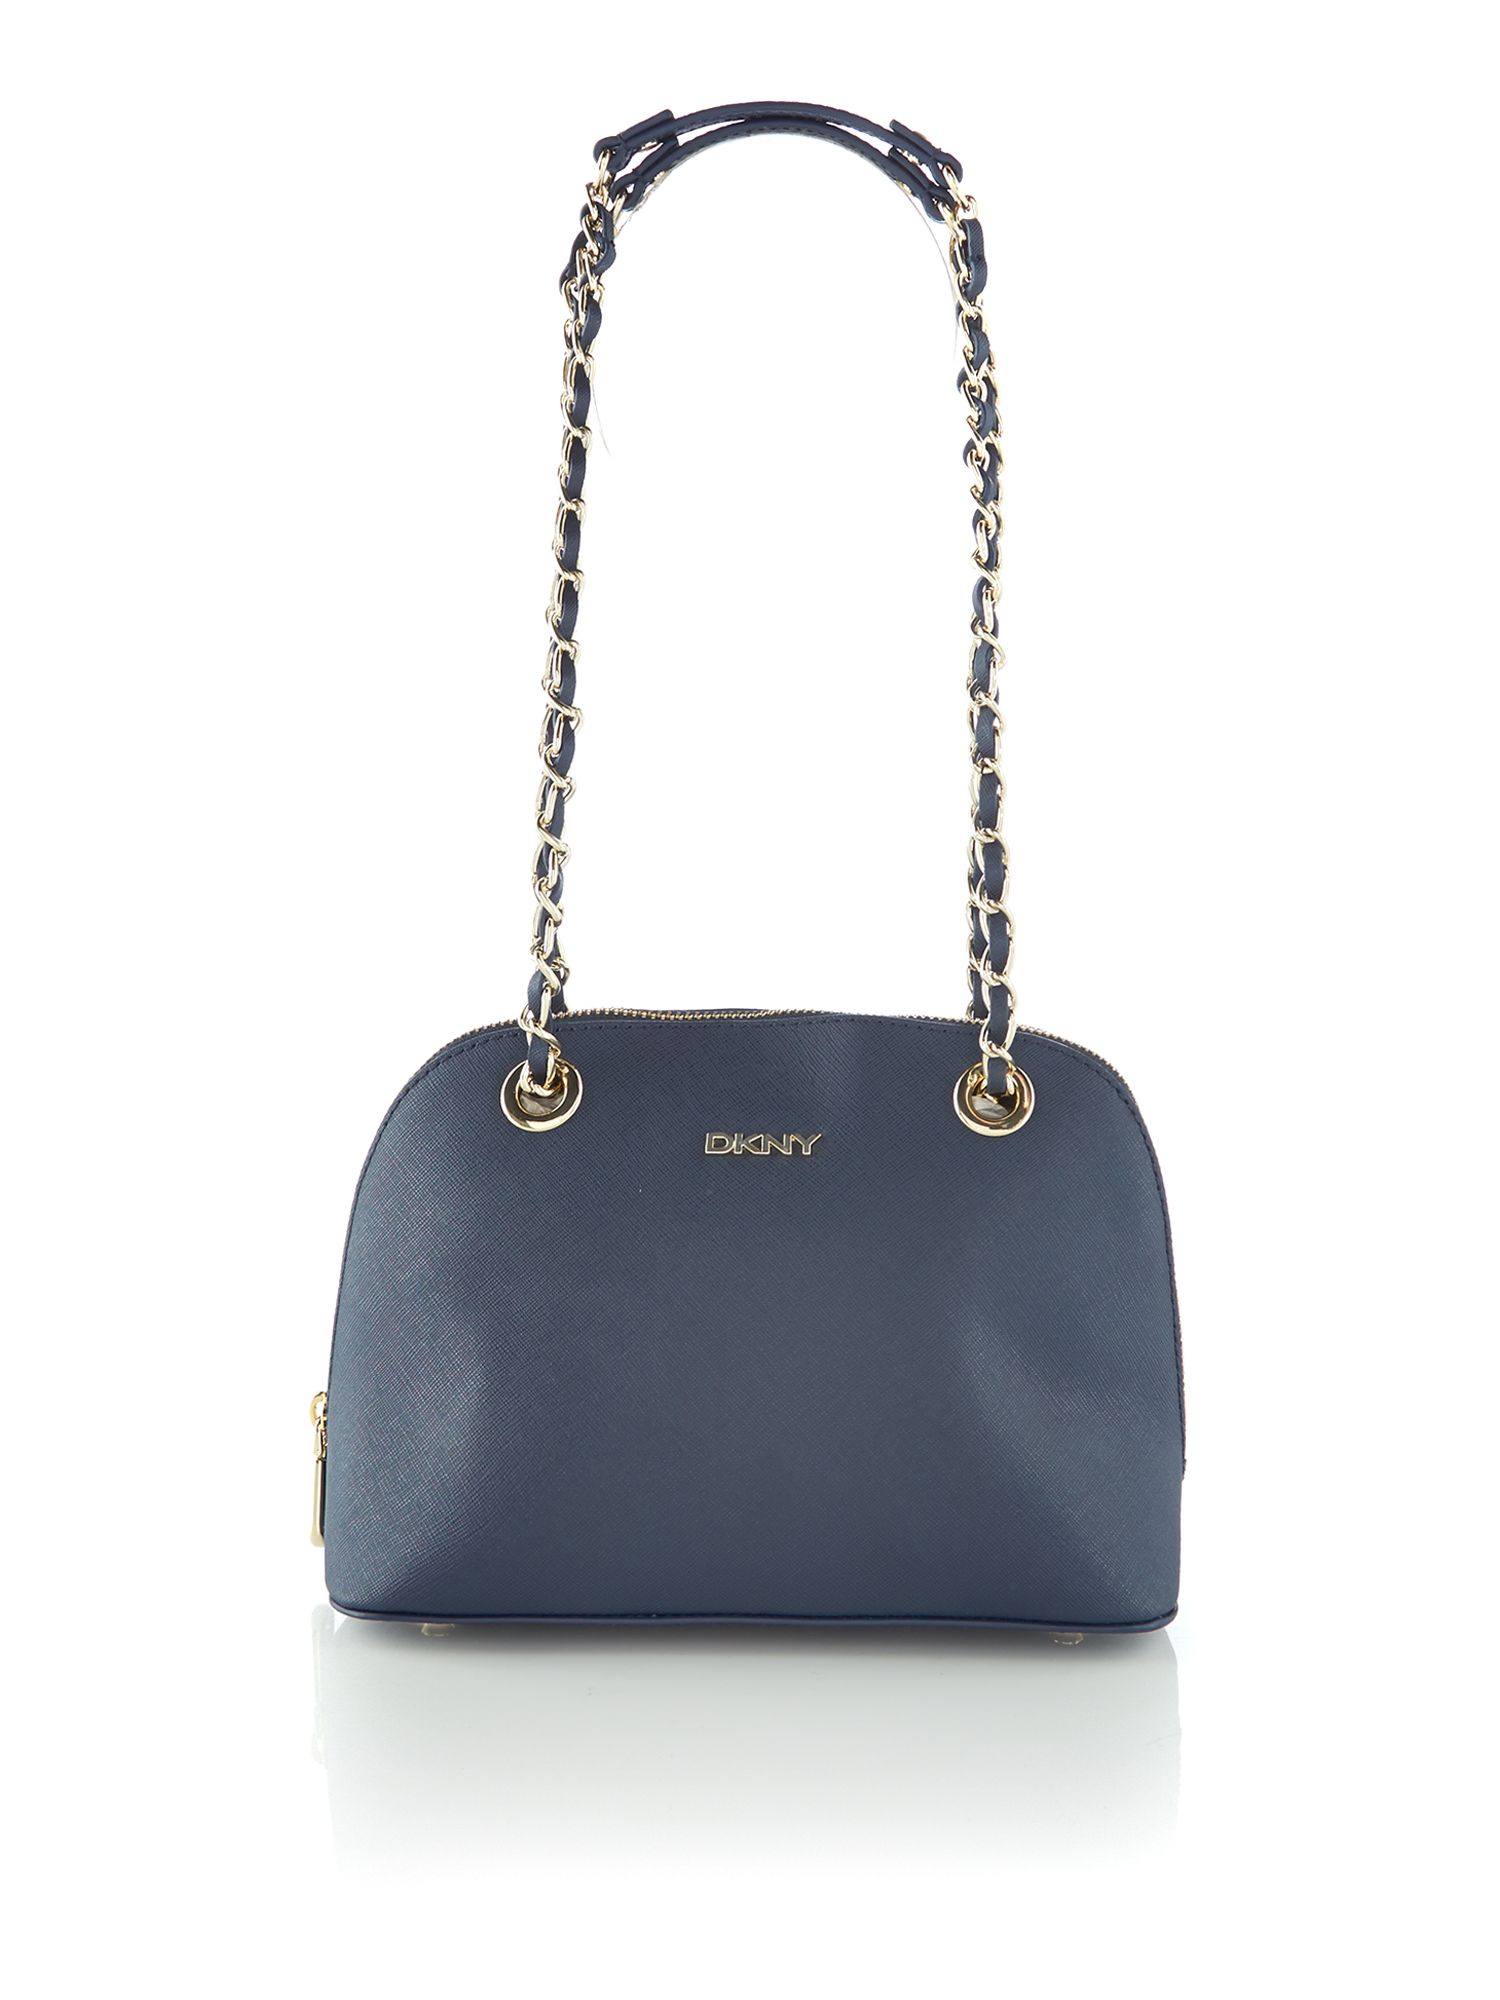 Dkny Saffiano Navy Small Rounded Cross Body Bag in Blue | Lyst